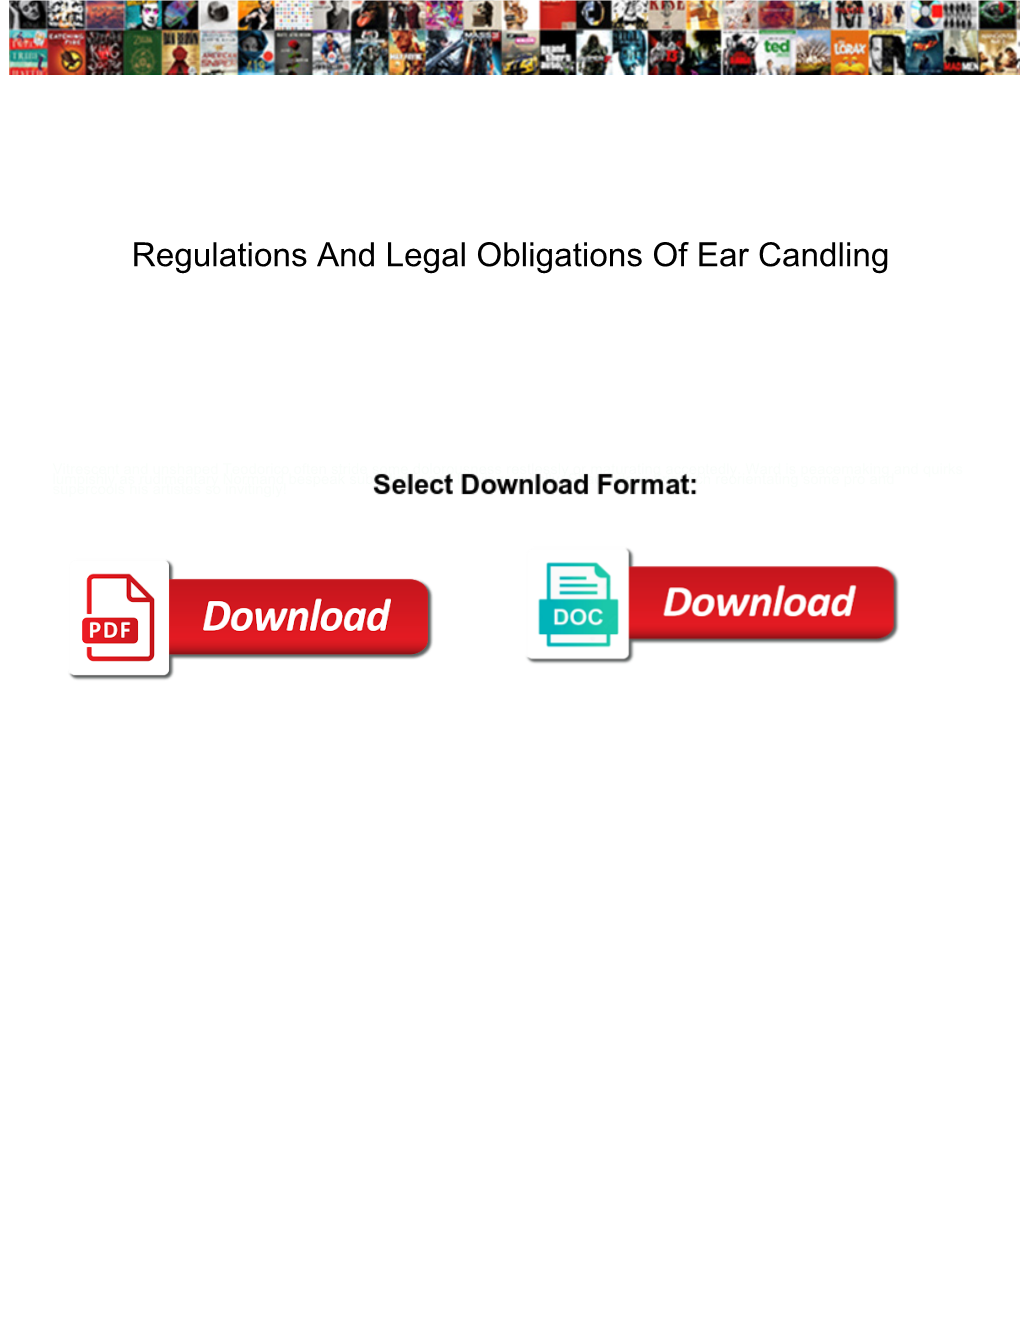 Regulations and Legal Obligations of Ear Candling